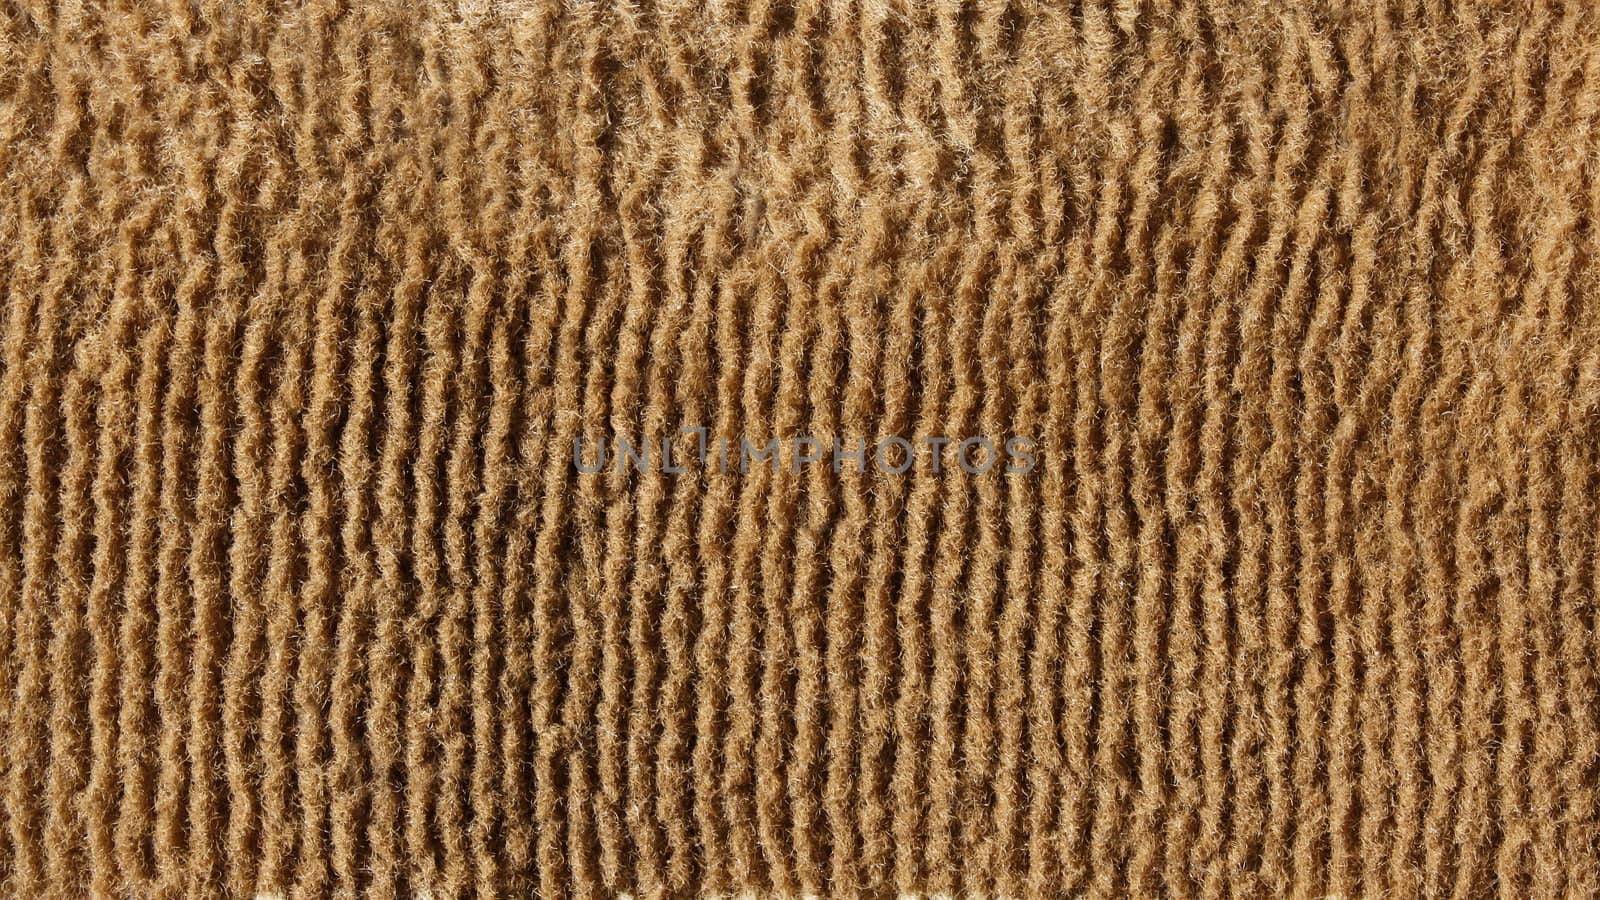 Fragment the surface of old beige fluffy floor carpet